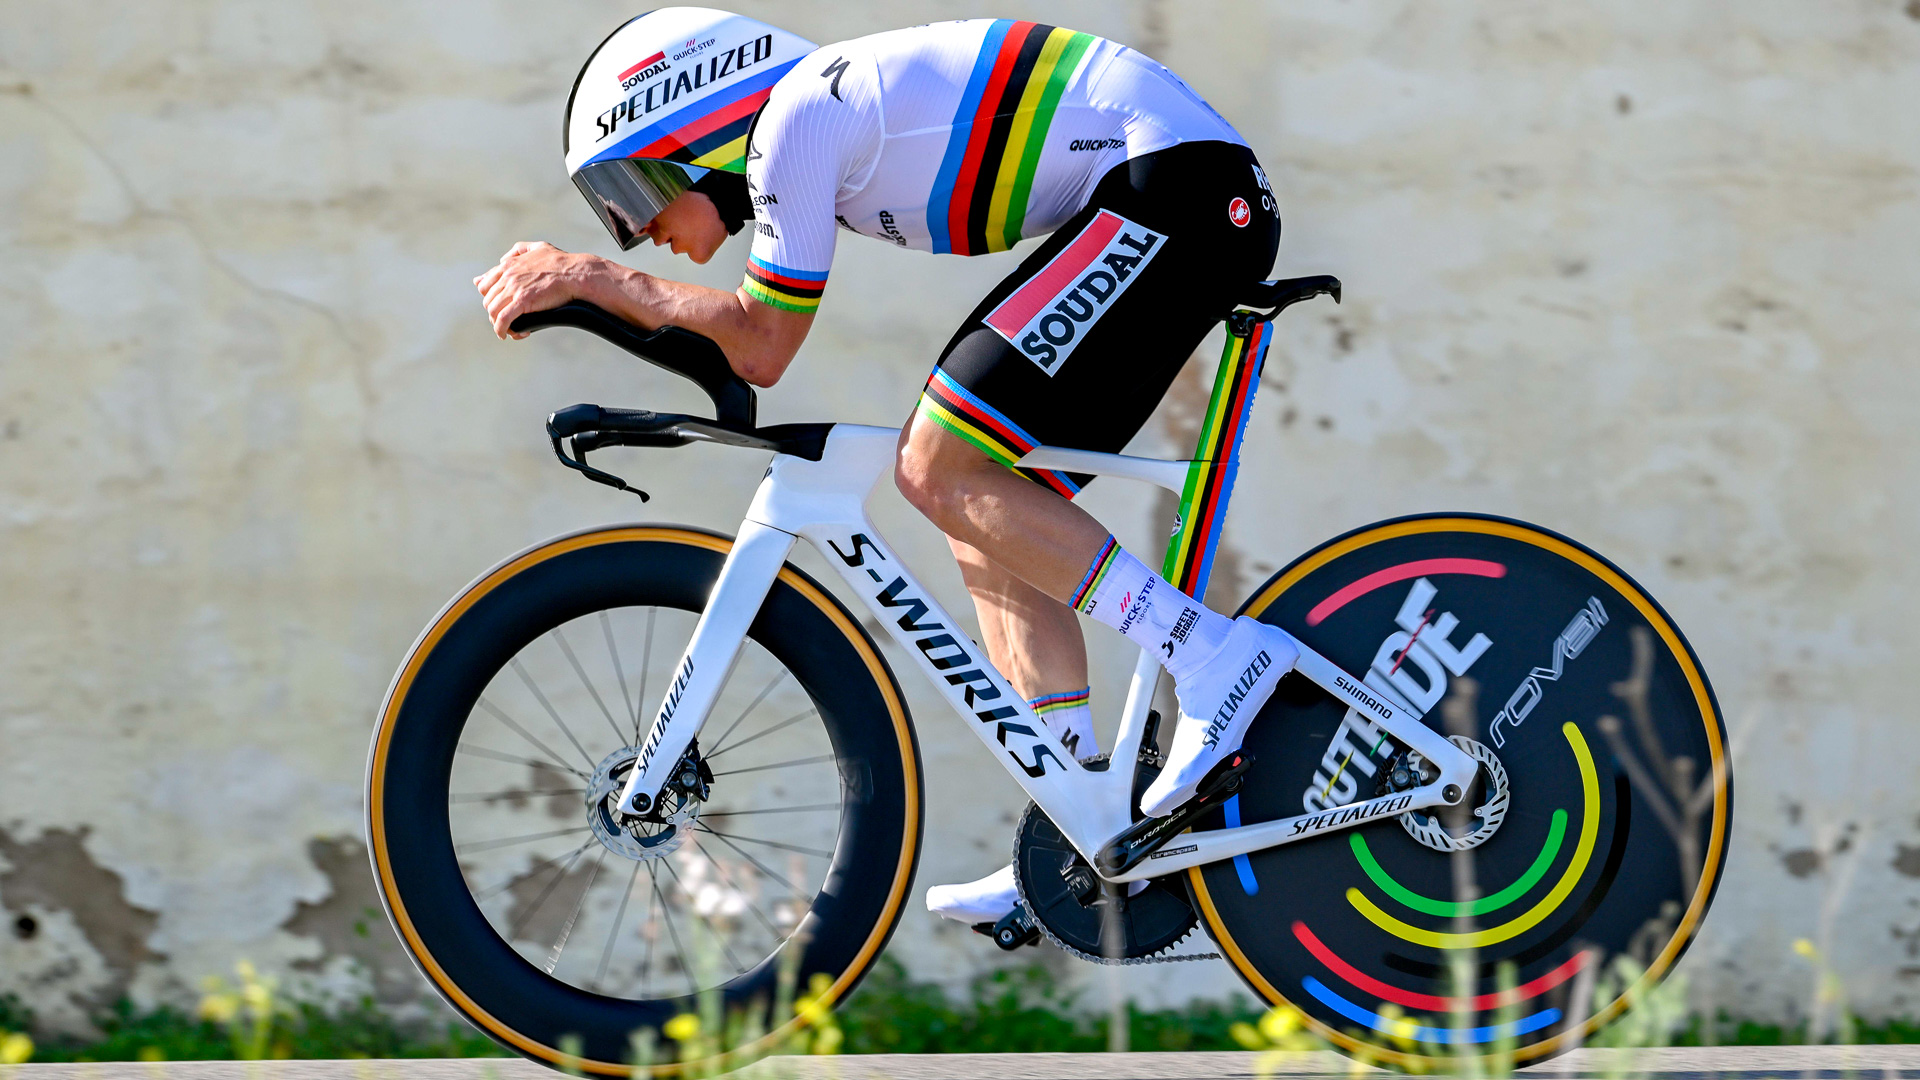 The image shows Remco Evenepoel in World Champions kit time trialling at the Volta Algarve. 